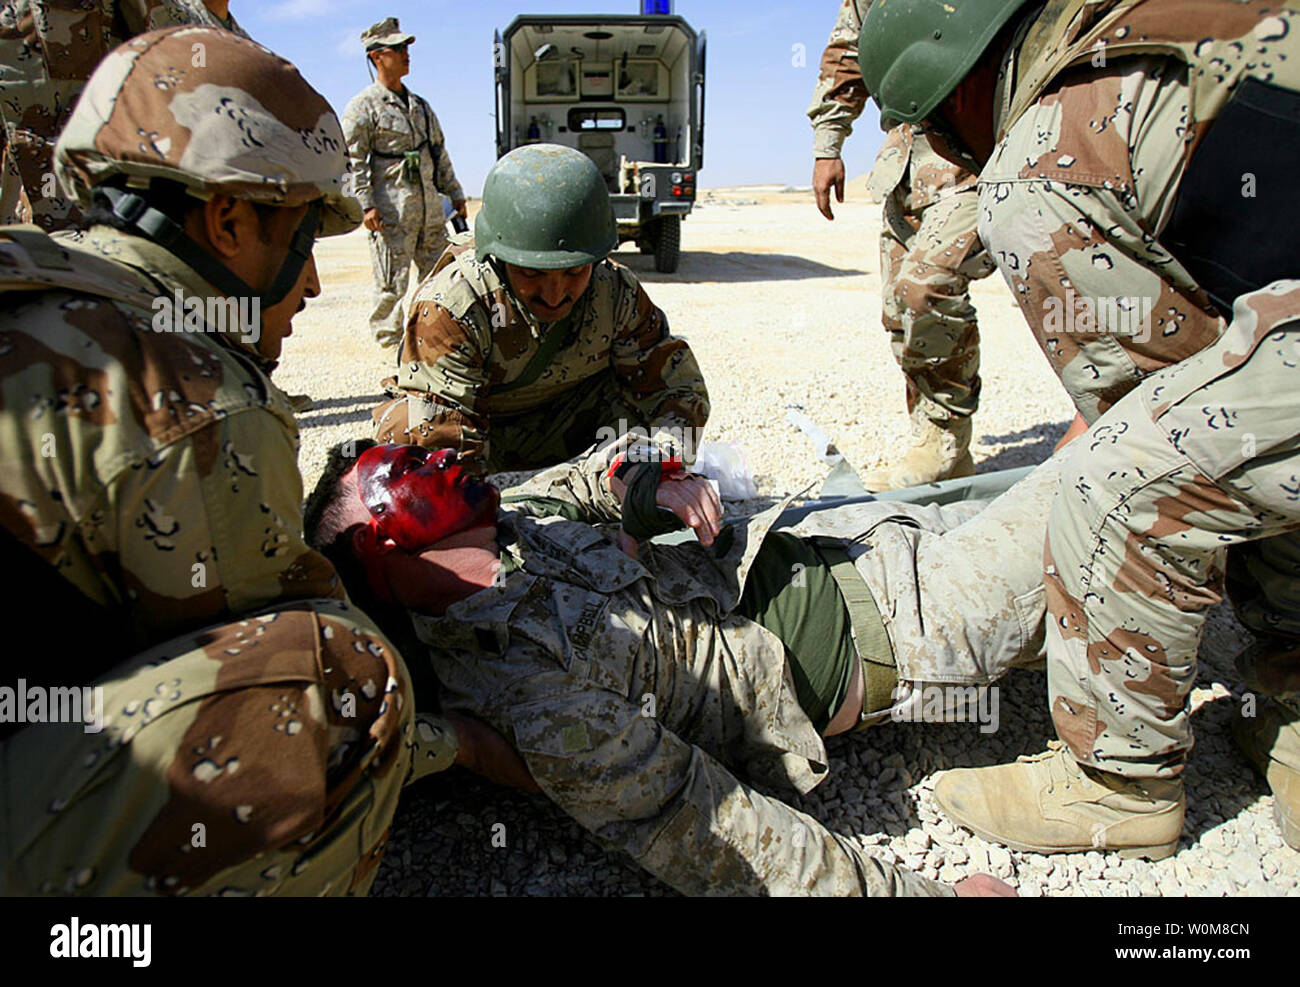 Iraqi soldiers lift Hospitalman James J. Campbell, a U.S. Navy corpsman with Regimental Combat Team 7 and mock casualty role-player, onto a stretcher before loading him into an ambulance during a mass casualty drill March 19, 2006, at the Iraqi Army camp at Al Asad, Iraq. The Iraqi soldiers, part of the 2nd Brigade, 7th Iraqi Army Division, conducted the drill to practice their response in the event of a real mass casualty event.   (UPI Photo/Staff Sgt. Jim Goodwin/USMC) Stock Photo